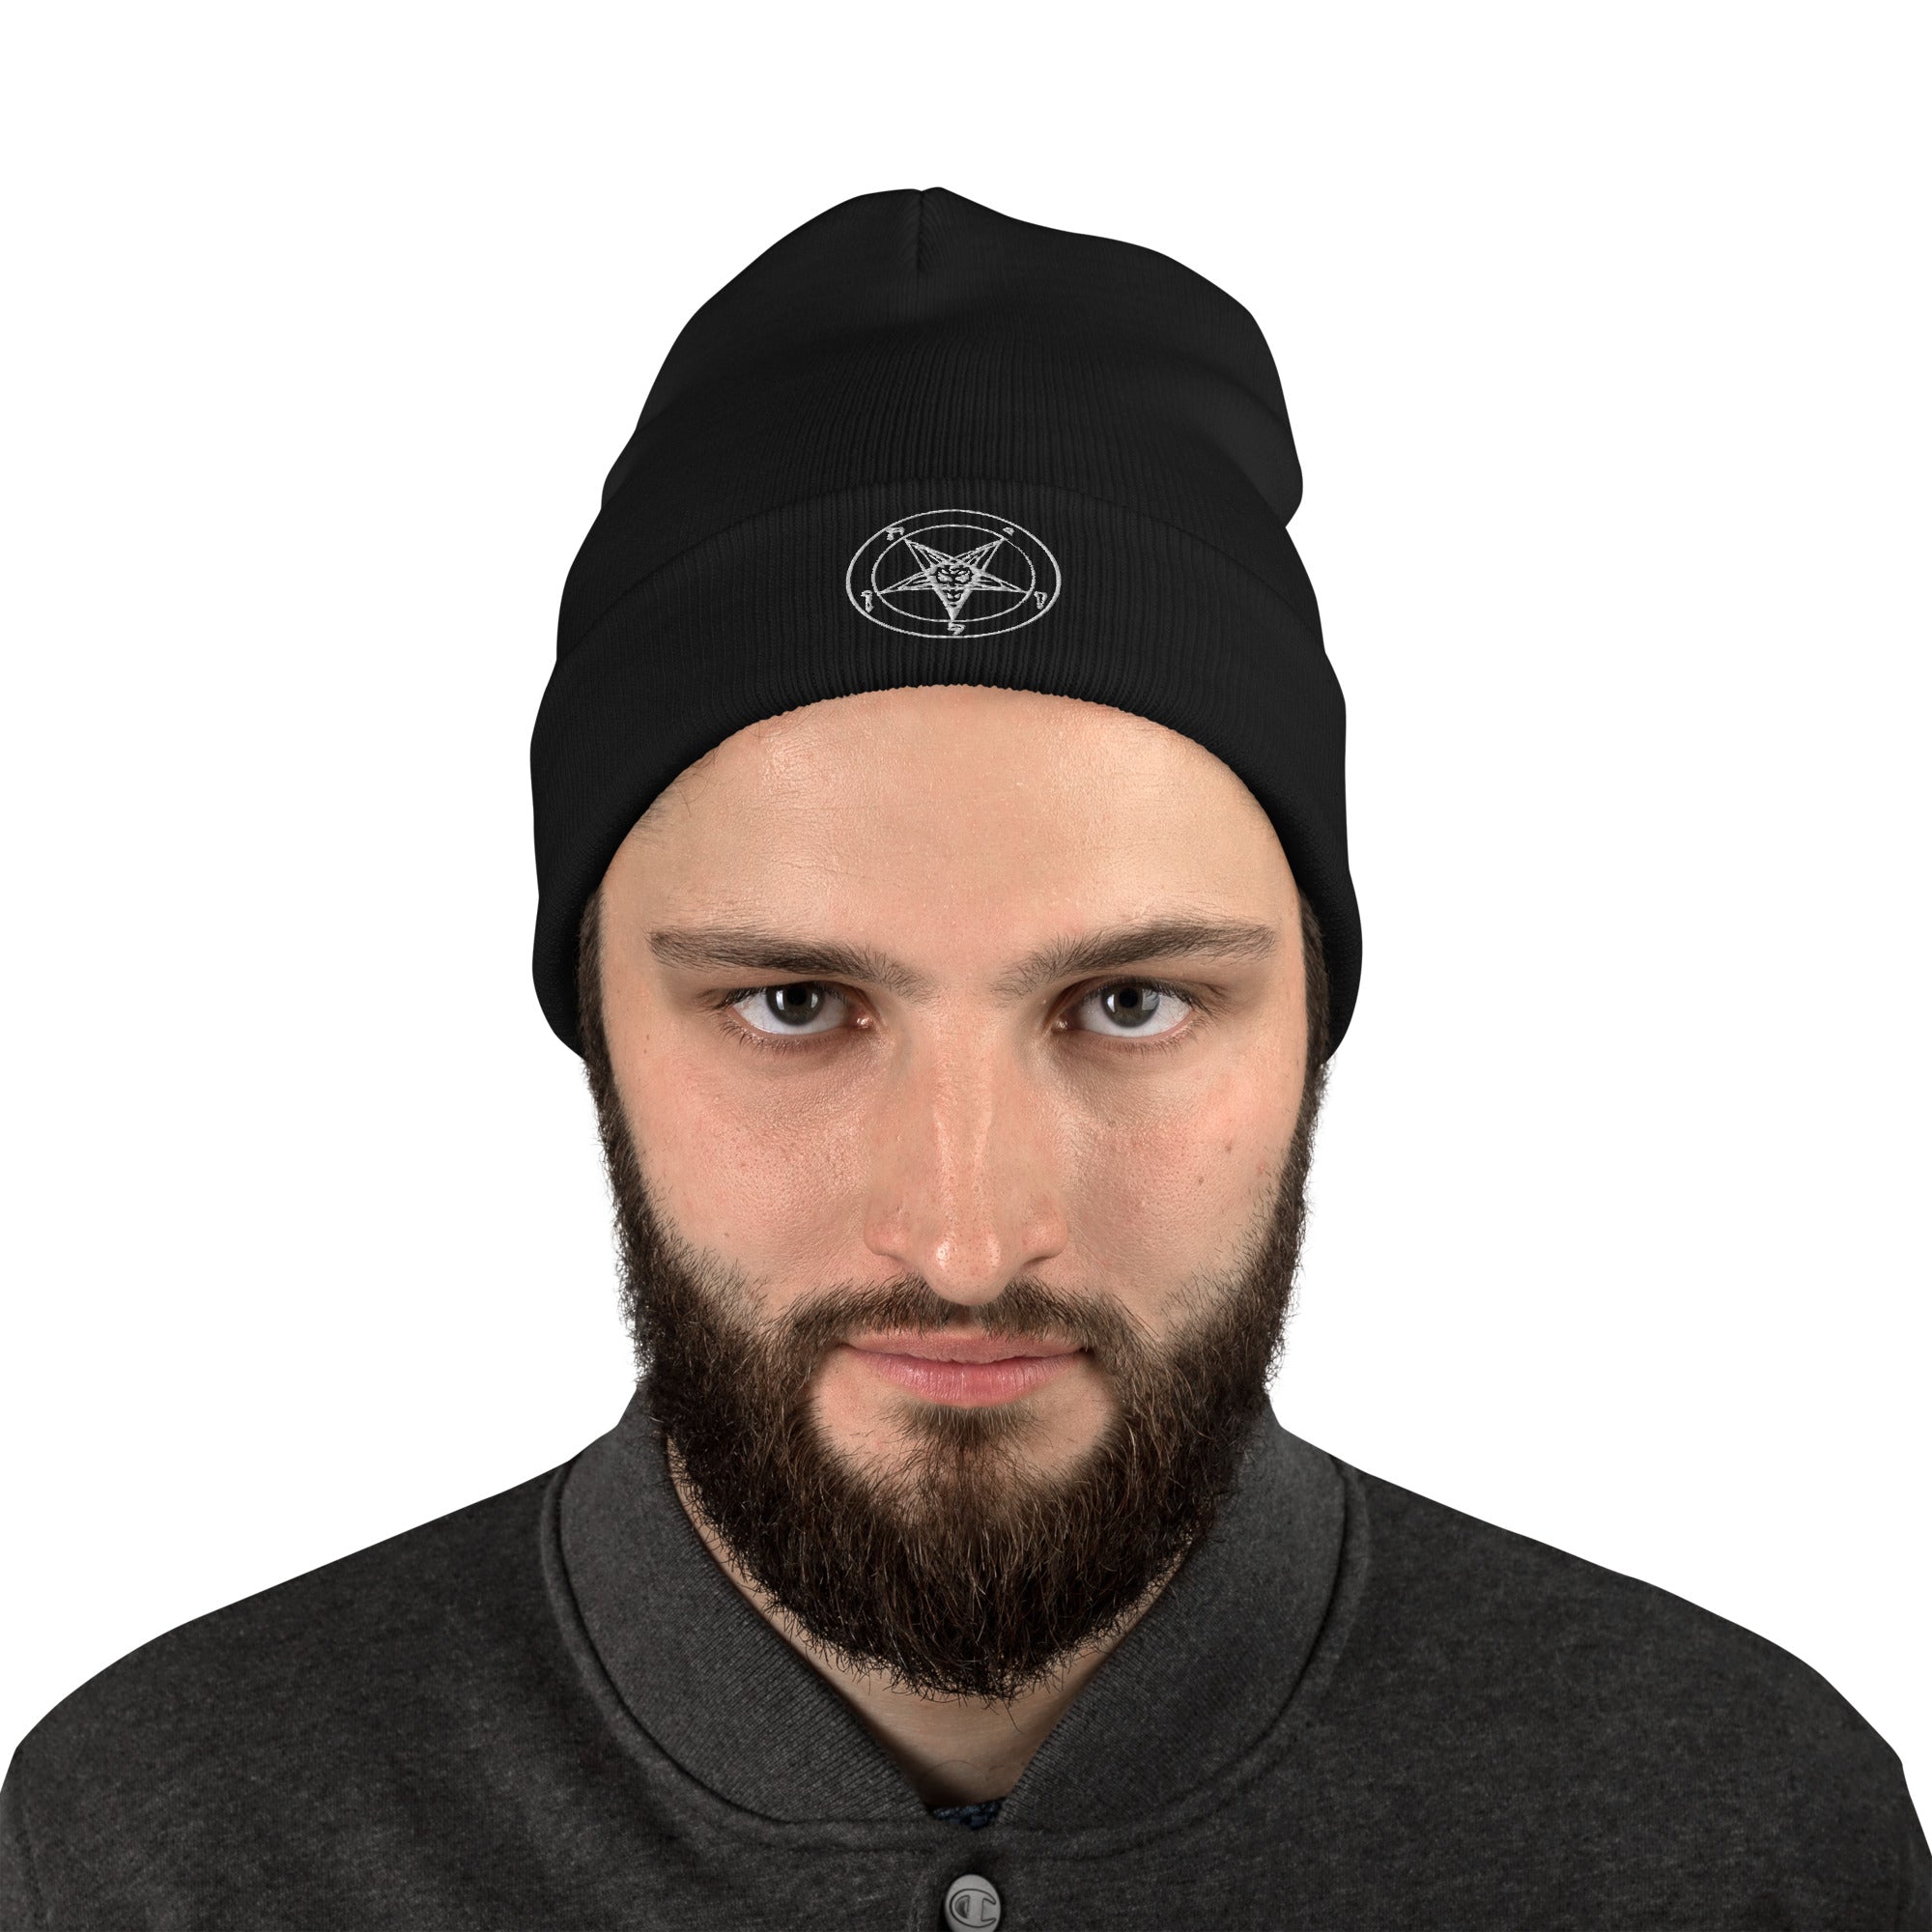 White Sigil of Baphomet Occult Symbol Embroidered Cuff Beanie - Edge of Life Designs